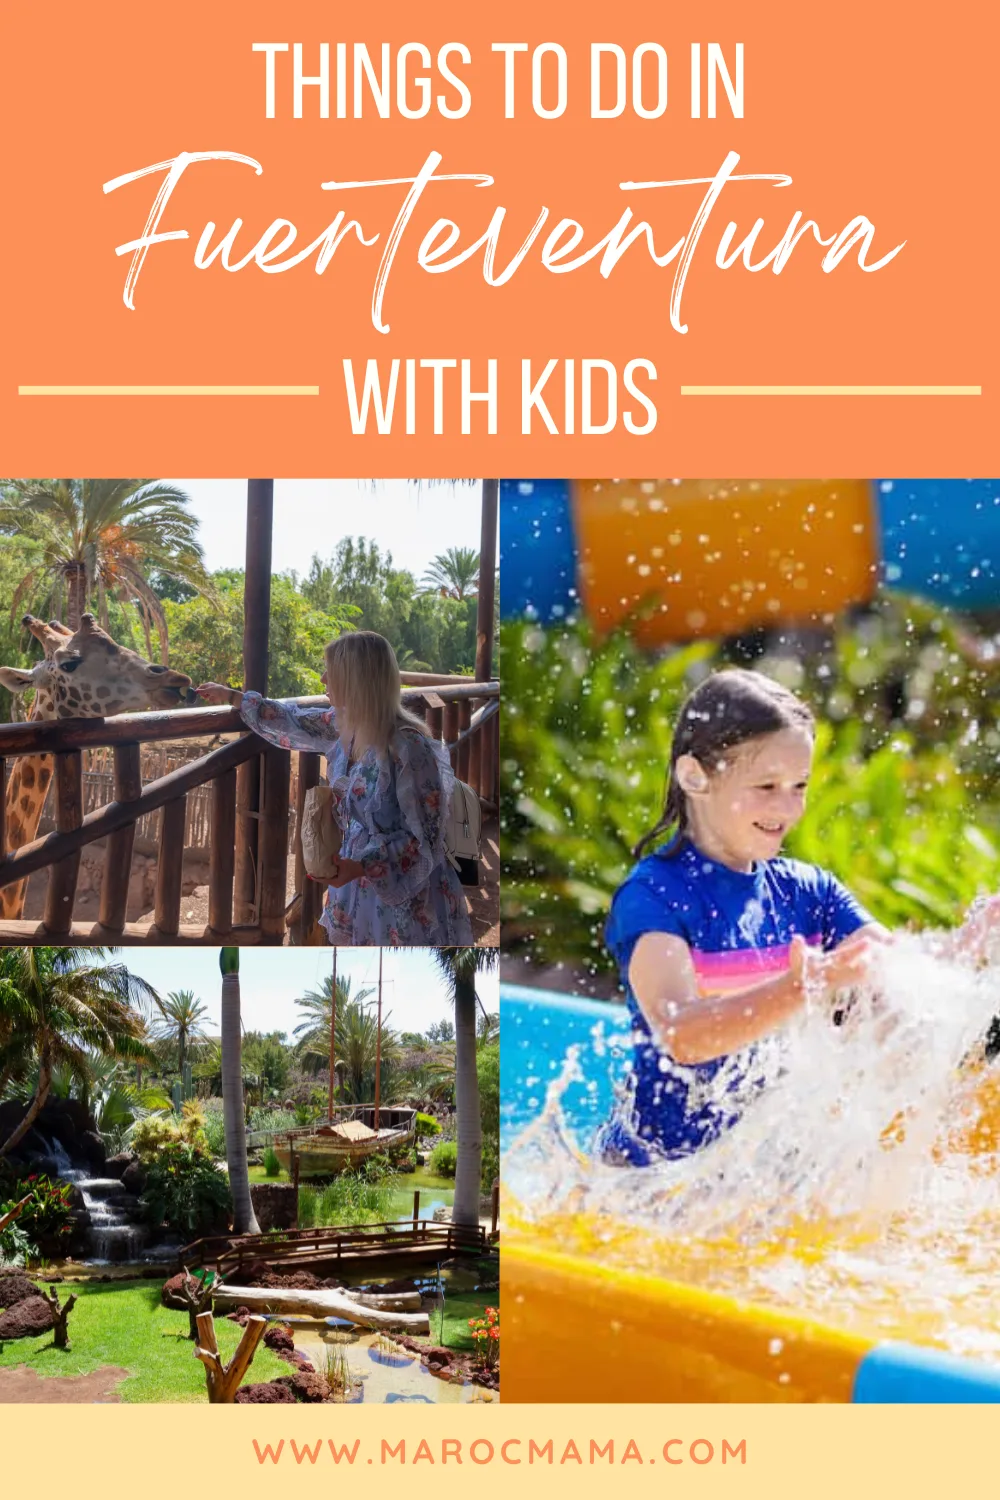 swimming and going to the zoo are the things to do in Fuerteventura with kids